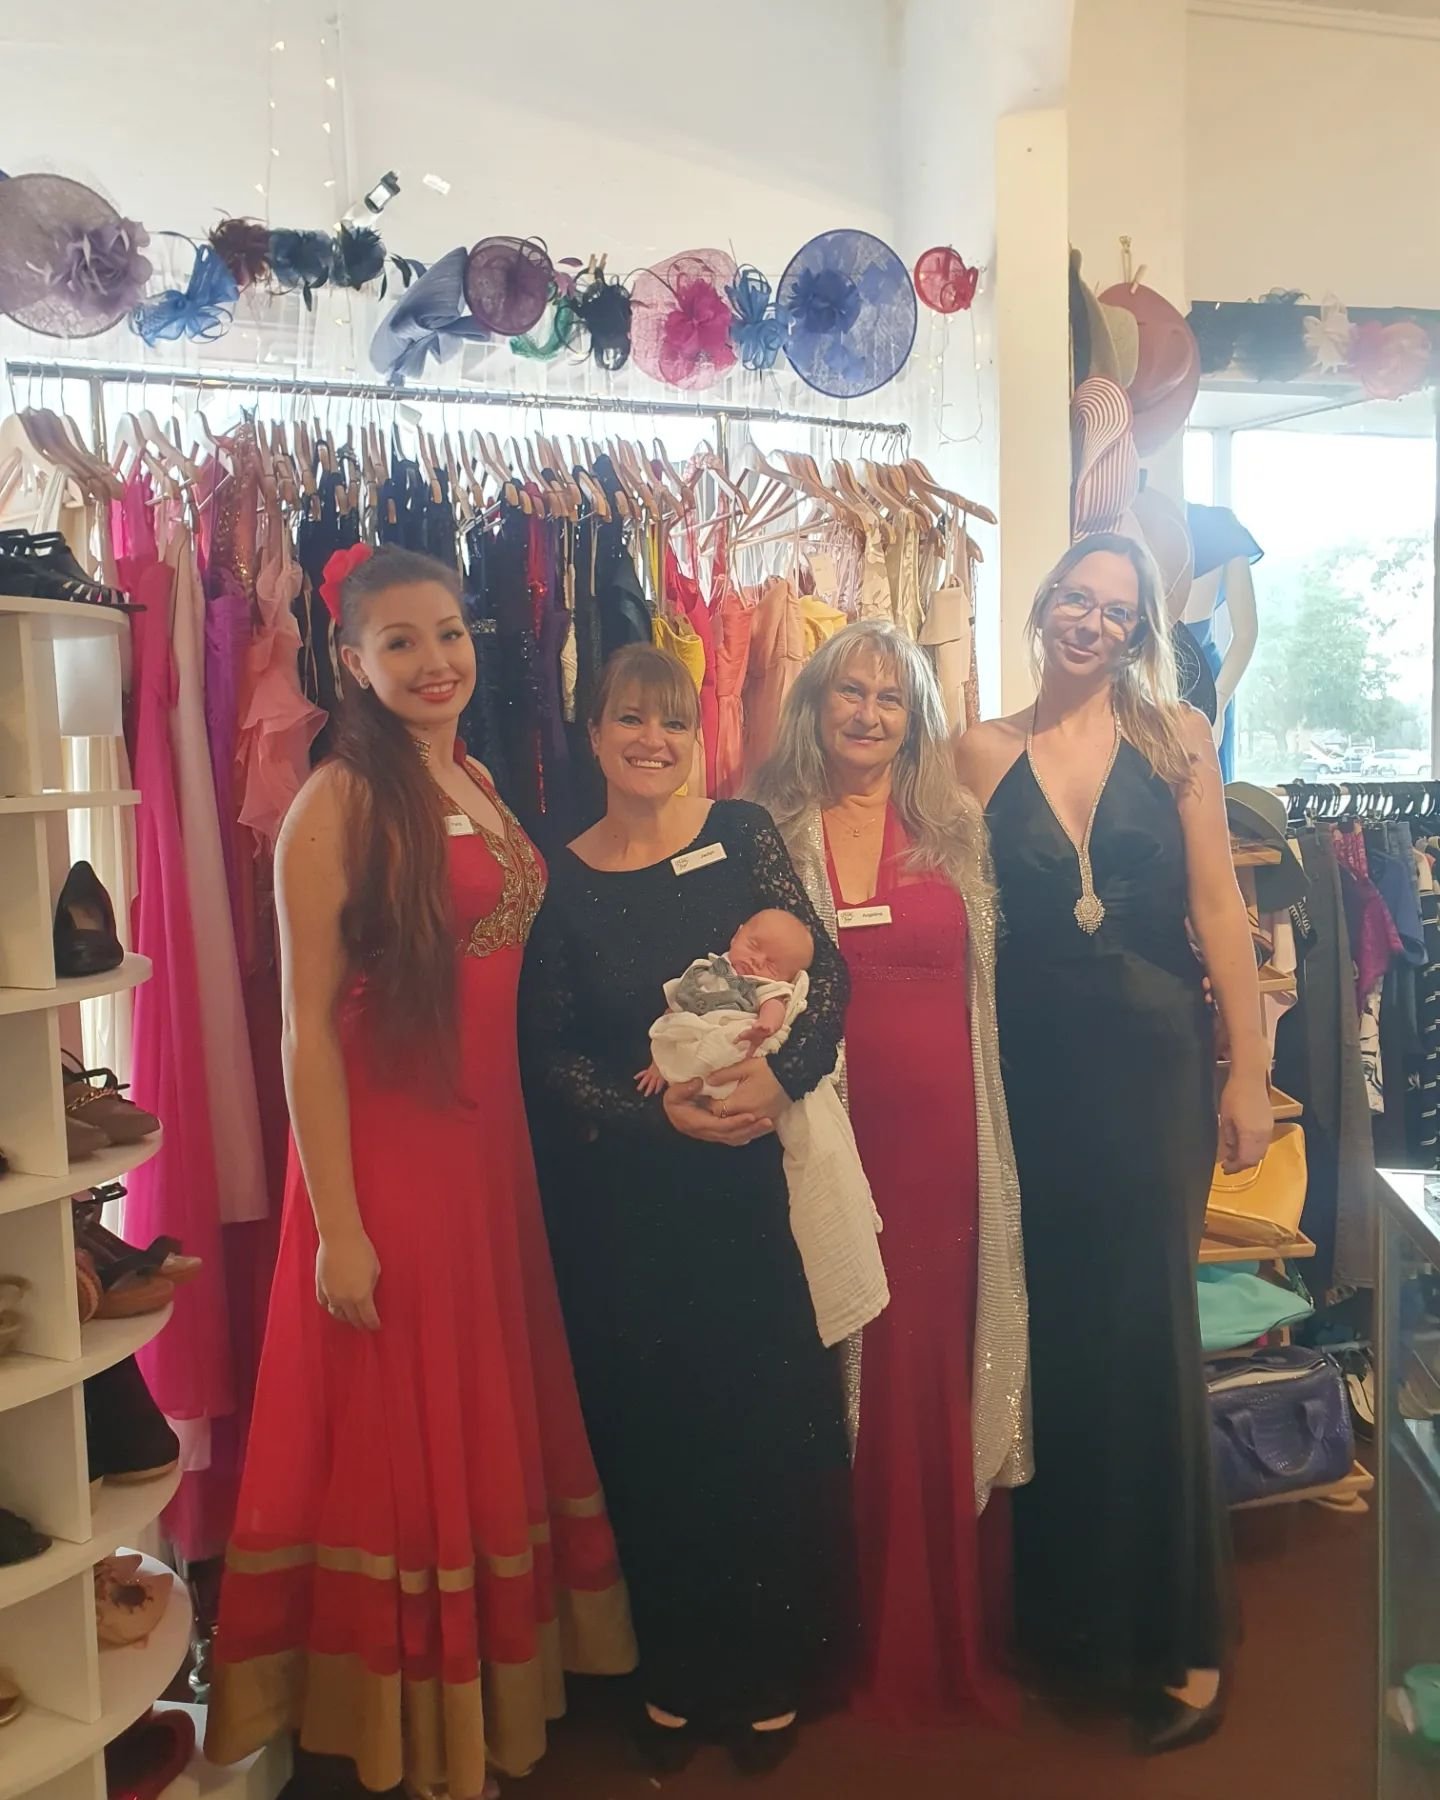 Our Ball Gown clearance is on NOW and the team is ready for you, wearing our ball gowns! 💃

Buy One, get one FREE for 3 days only! Hurry in! Levi has his bow tie on! Xx

#ootd #outfitoftheday #pertheventwear #perthfashion #prelovedfashion #perthcons